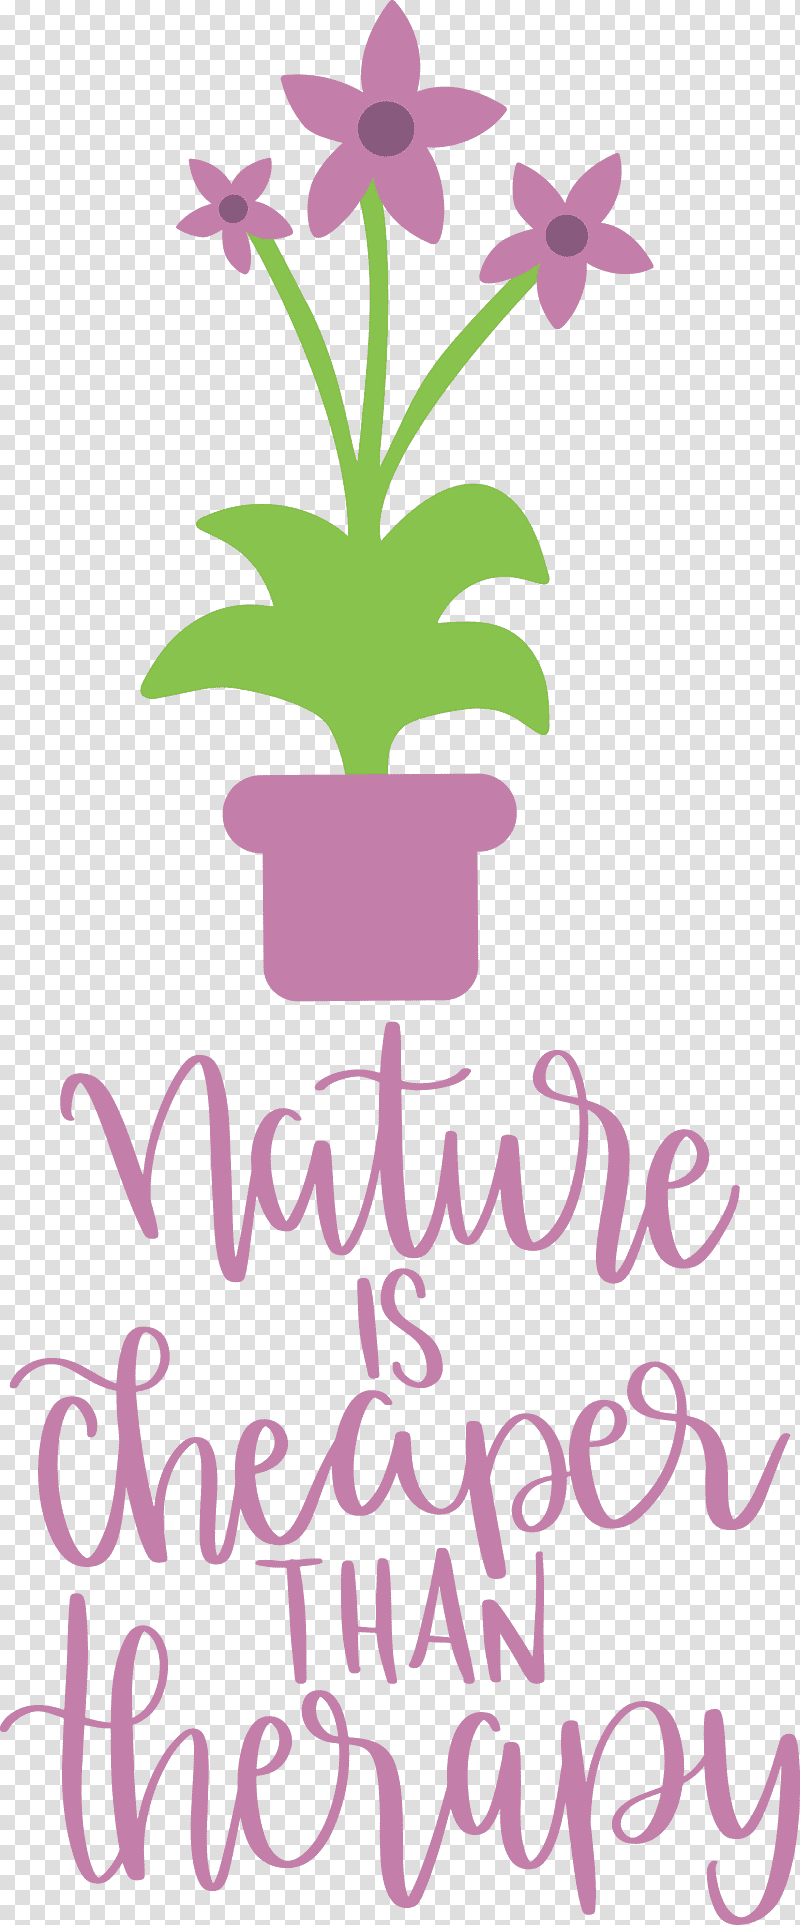 Nature Is Cheaper Than Therapy Nature, Floral Design, Leaf, Cut Flowers, Plant Stem, Hay Flowerpot With Saucer, Petal transparent background PNG clipart